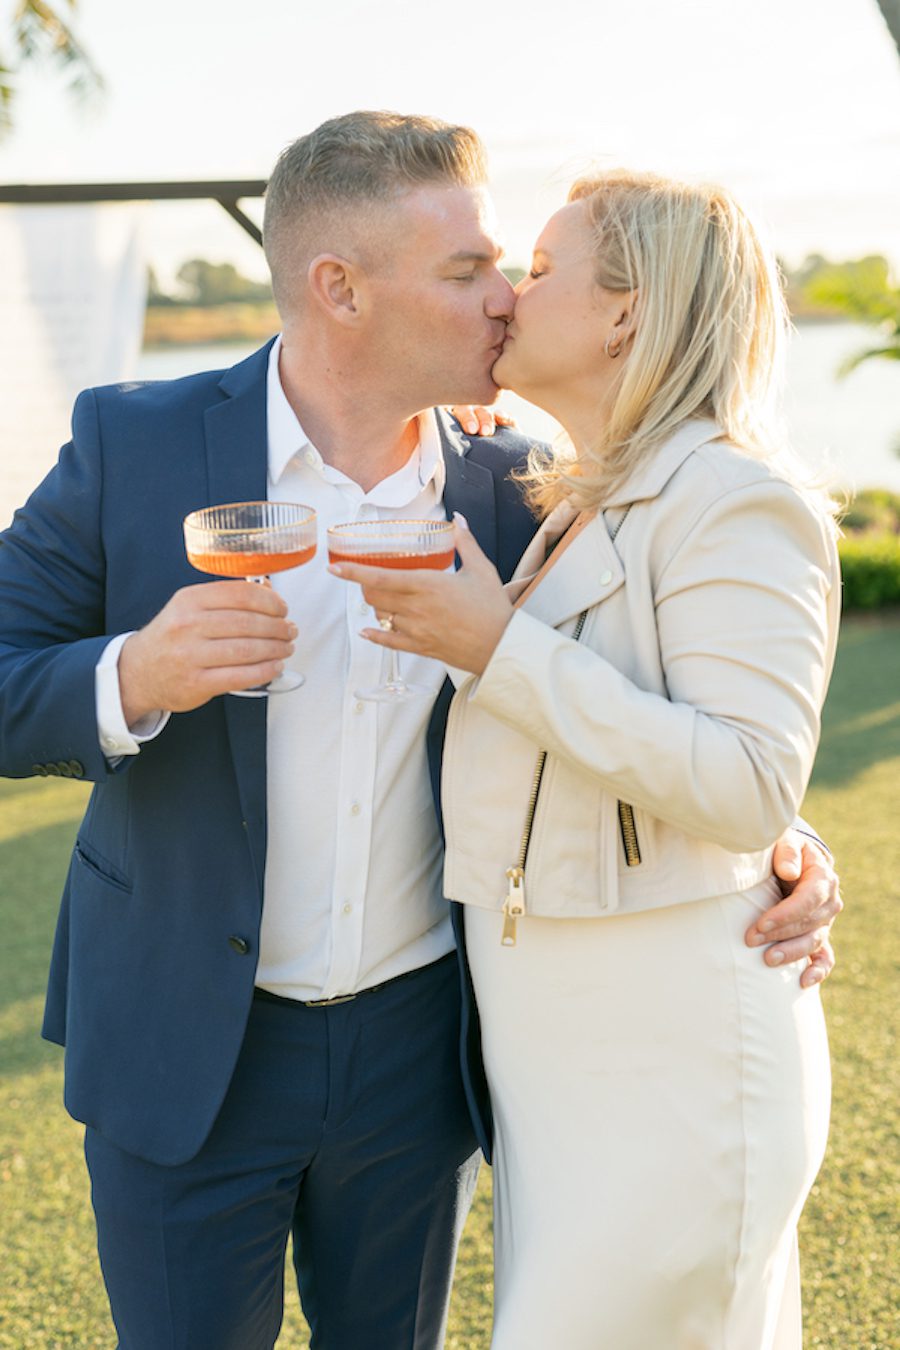 Toasting as a newly engaged couple at this waterfront proposal in San Diego CA